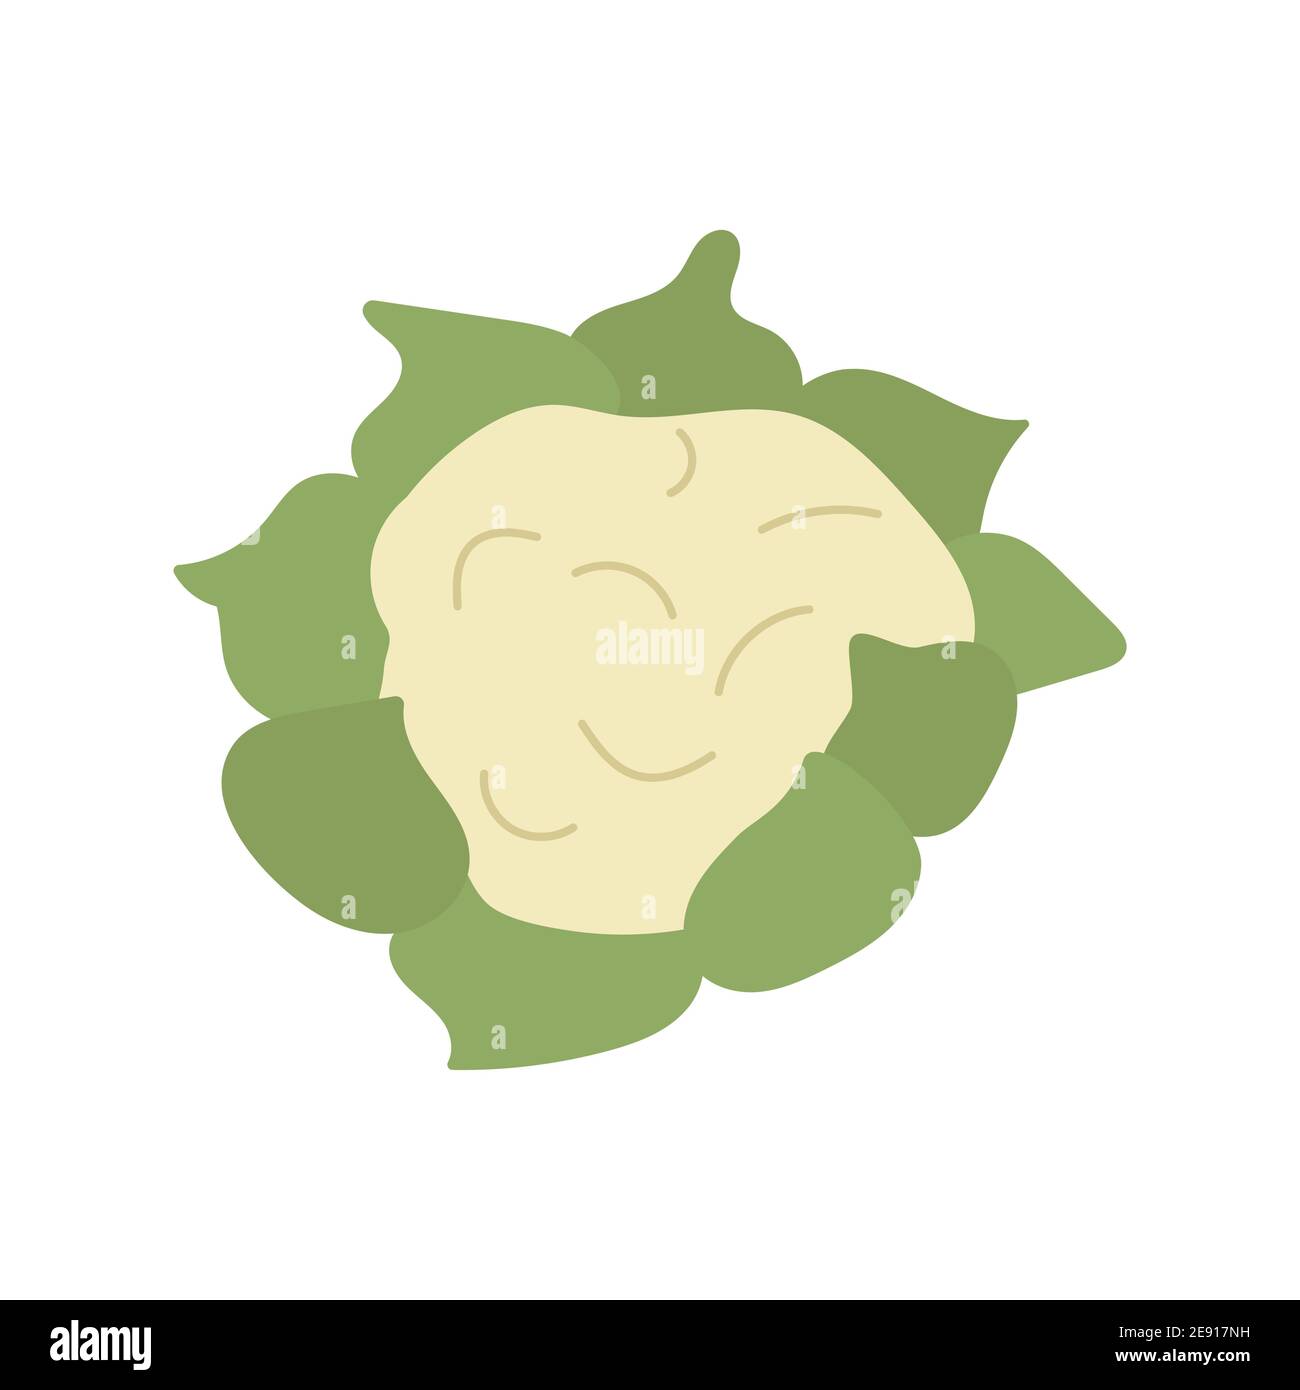 Cauliflower. Colorful vector illustration in cartoon style isolated on